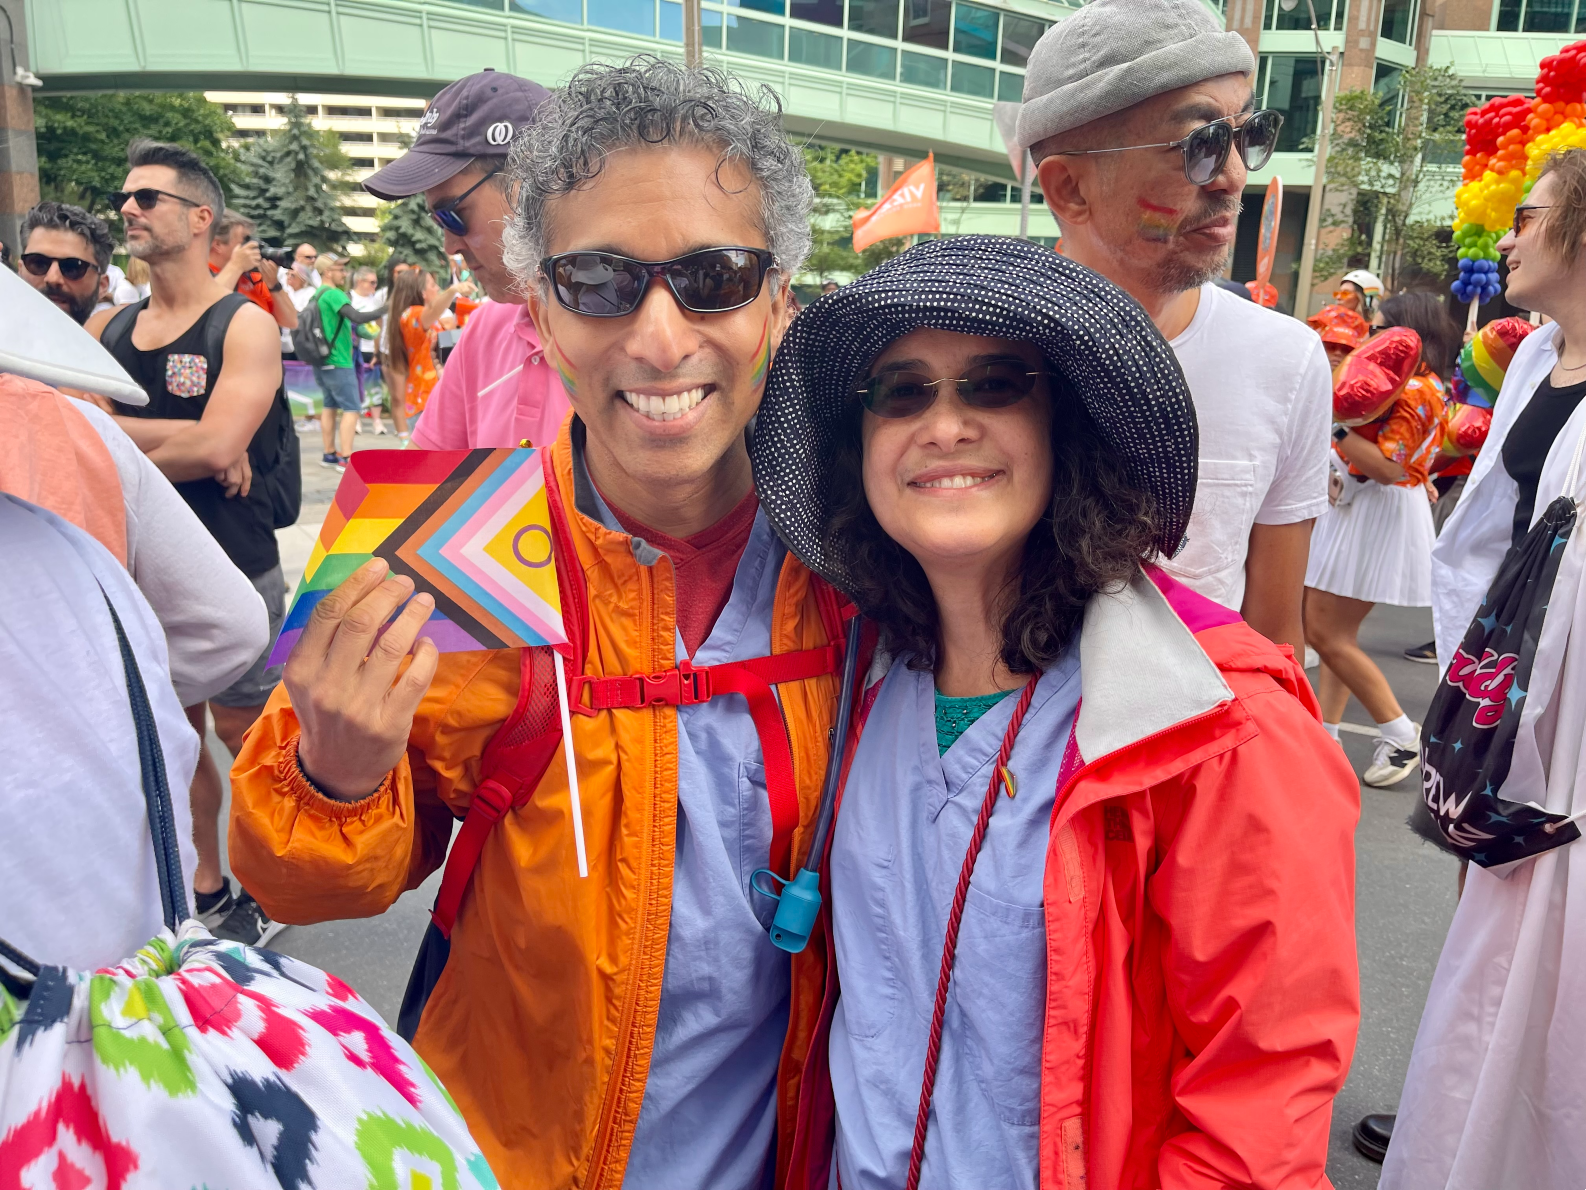 A man and woman wearing orange shirts and lavender scrubs smile while holding a Pride flag.